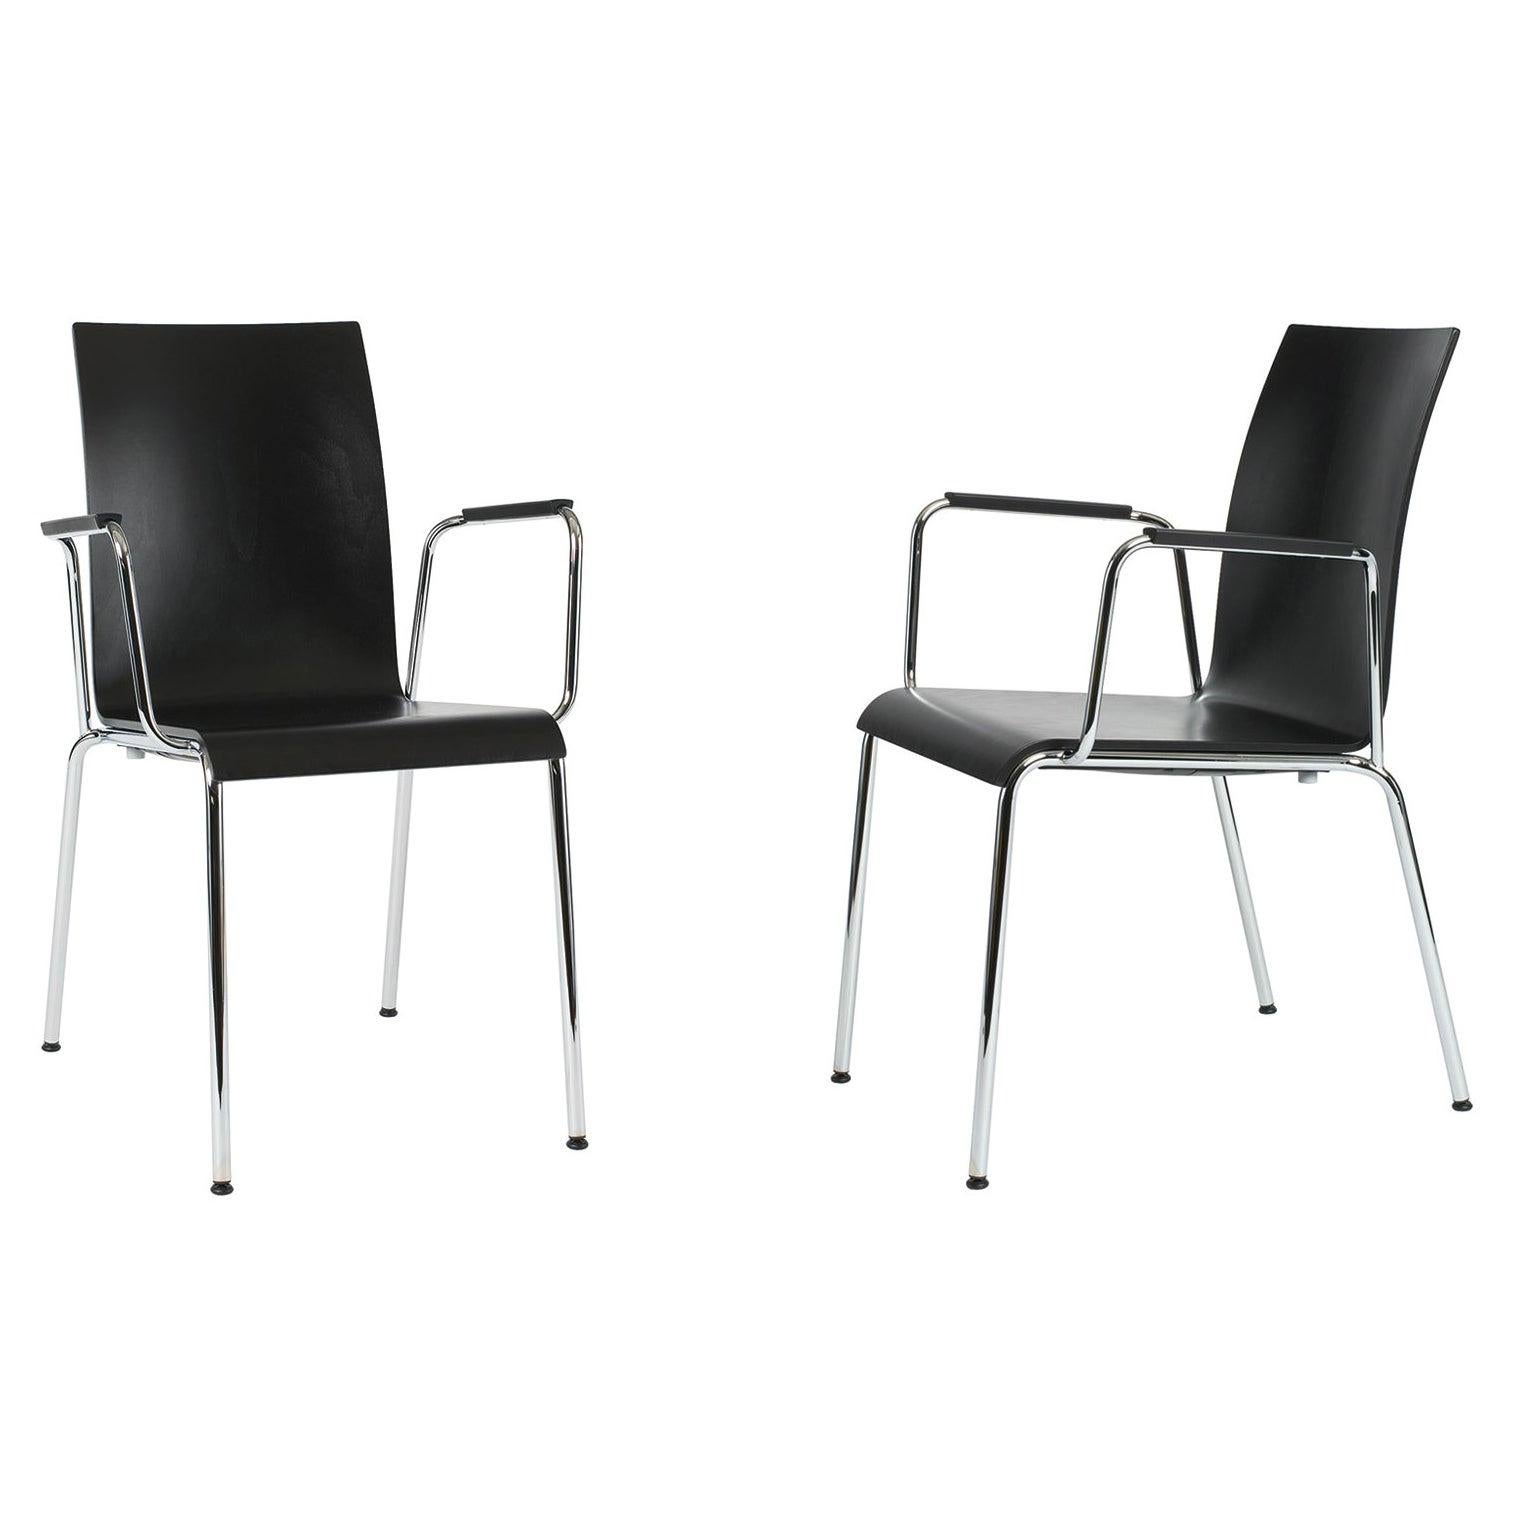 Set of 2 Dietiker Poro S Minimalist Dining Chairs with Arms, Made in Switzerland